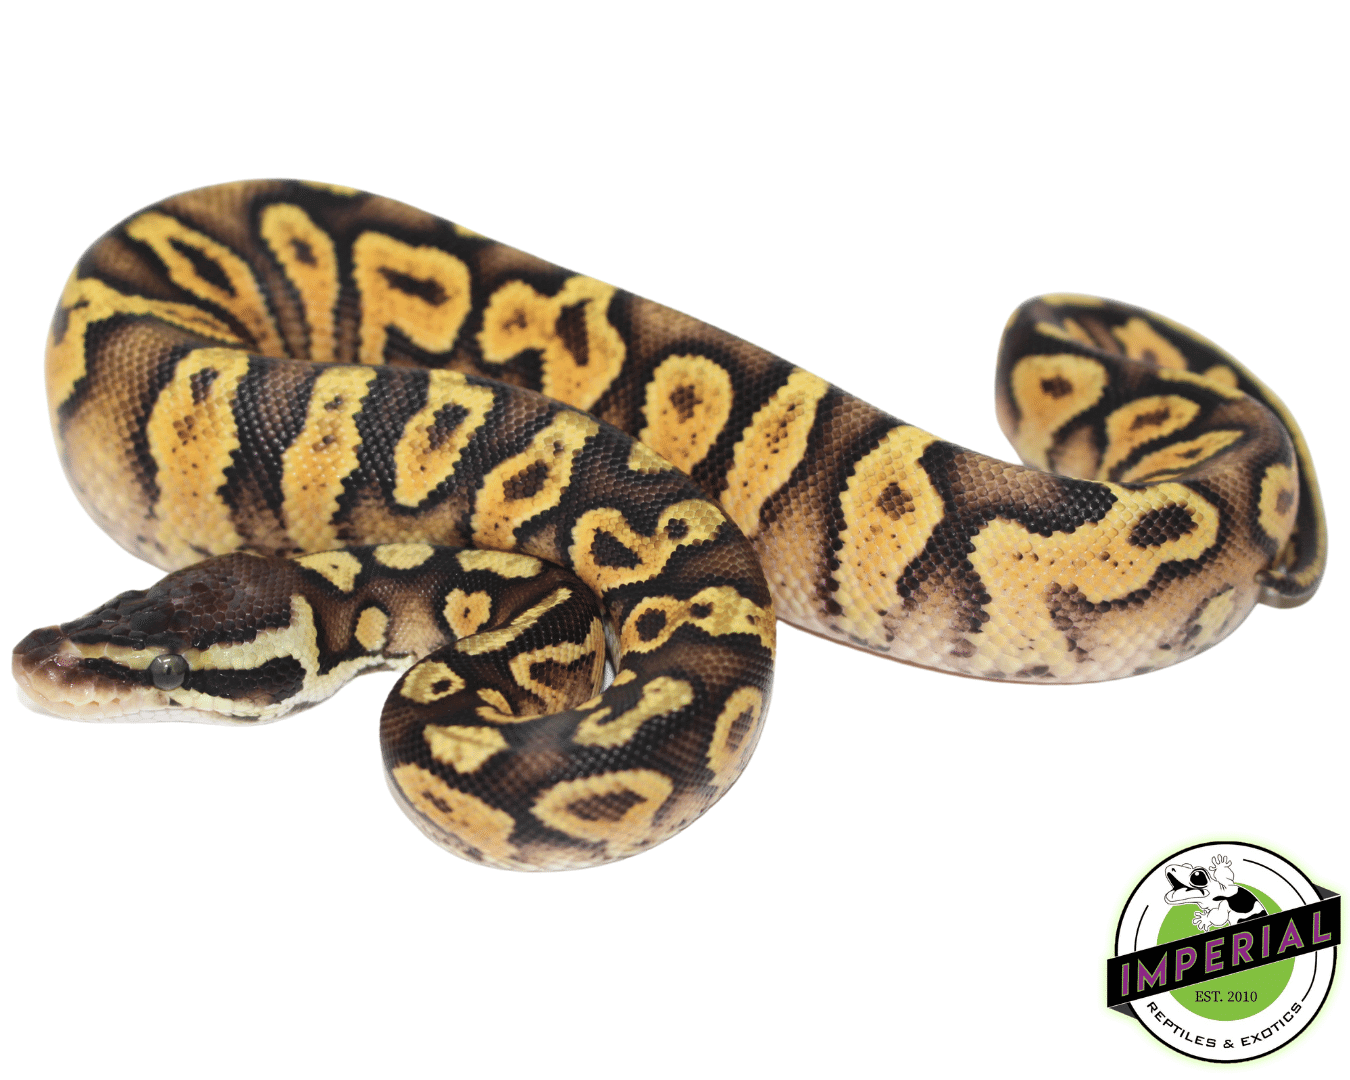 pastel spark ball python for sale, buy reptiles online